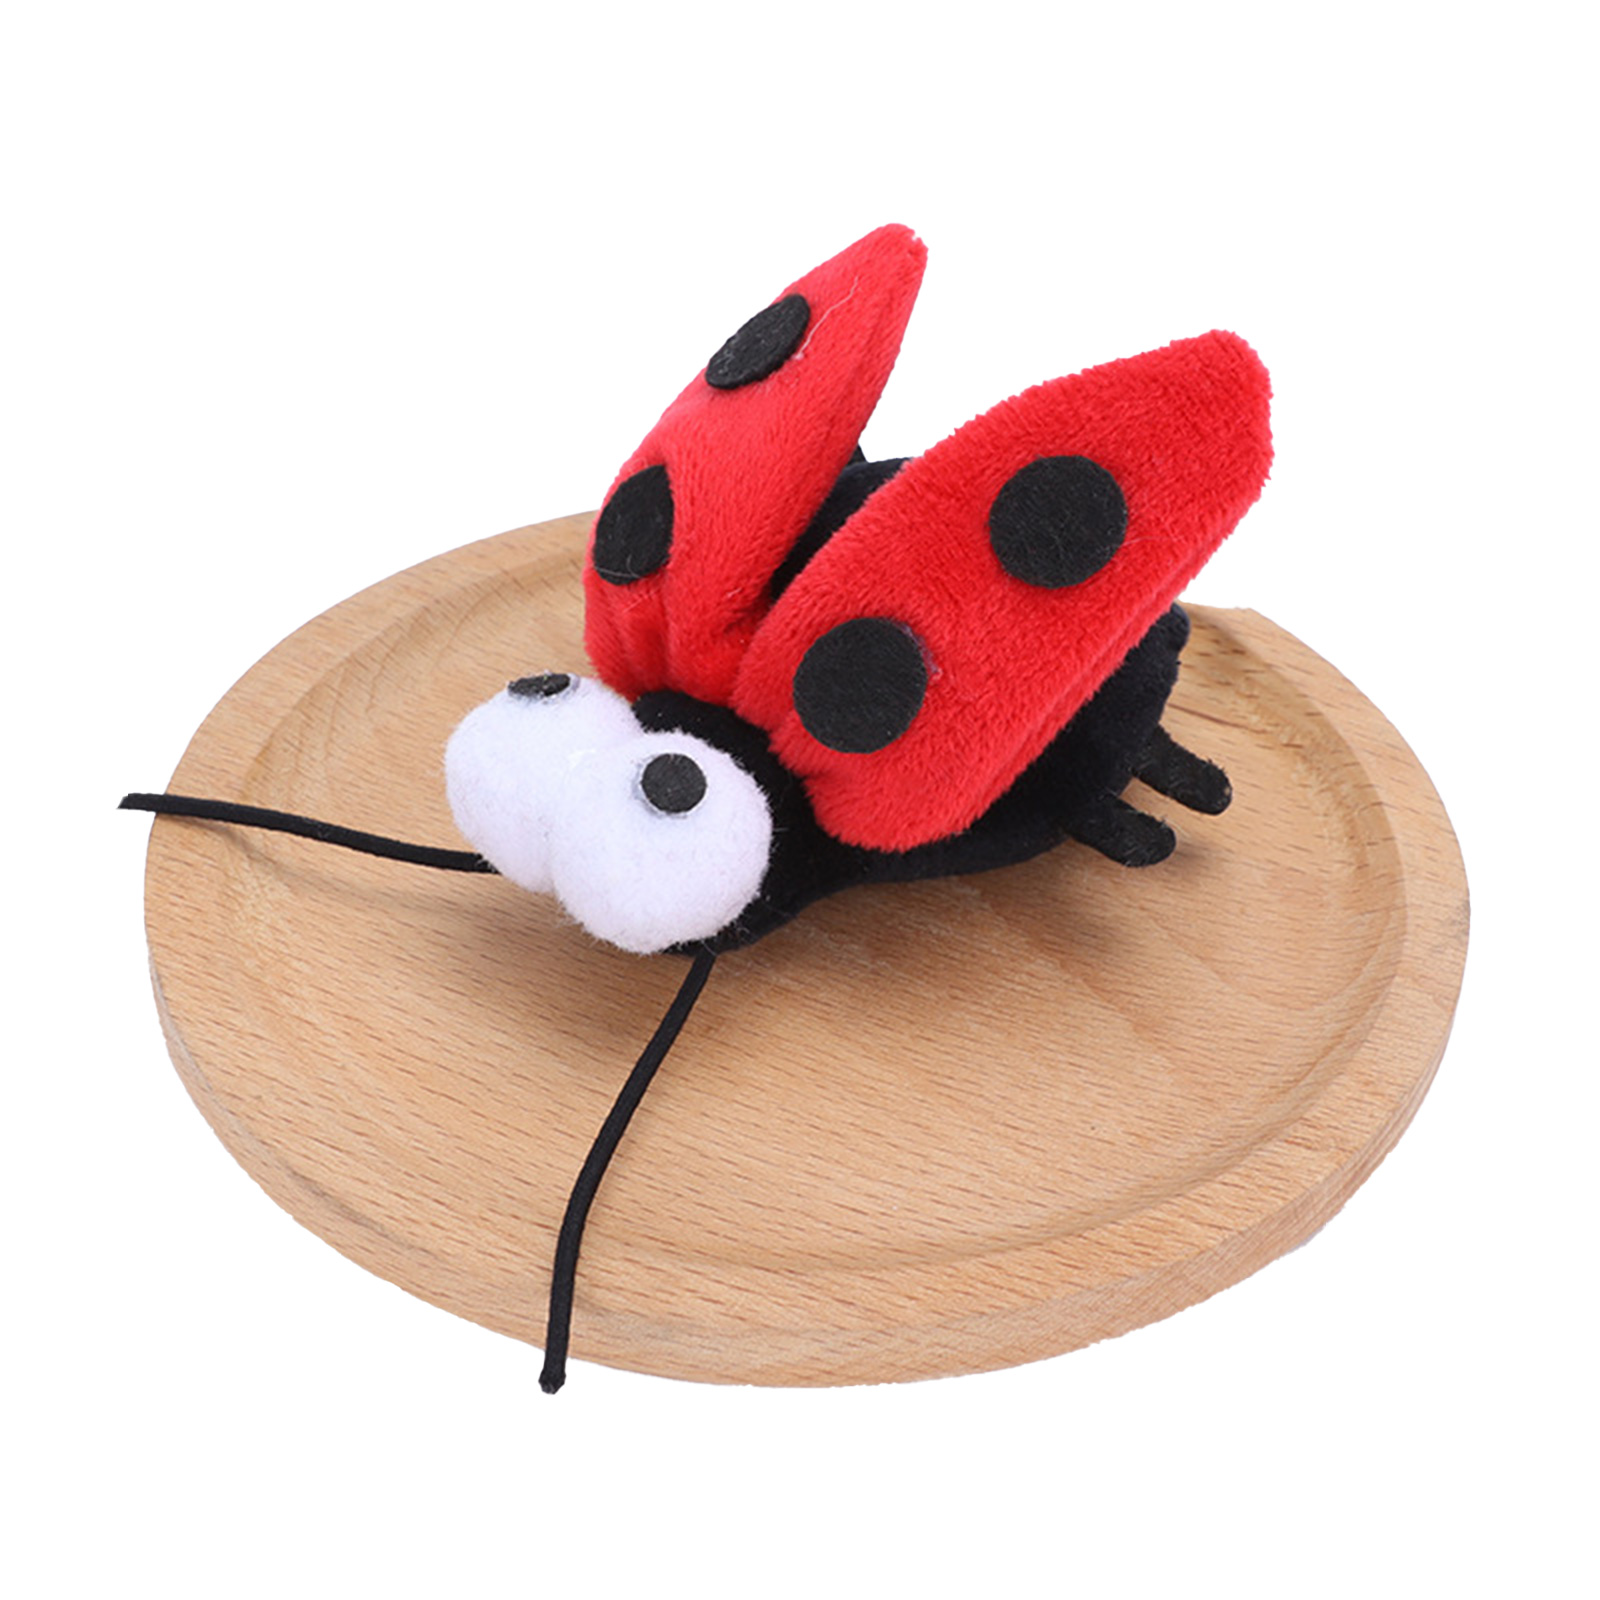 Cat Toys Simulation Hedgehog Bird Ladybird Frog Squeaky Interactive Plush Toys Pet Supplies For Small Dogs Puppy Kitten Frog